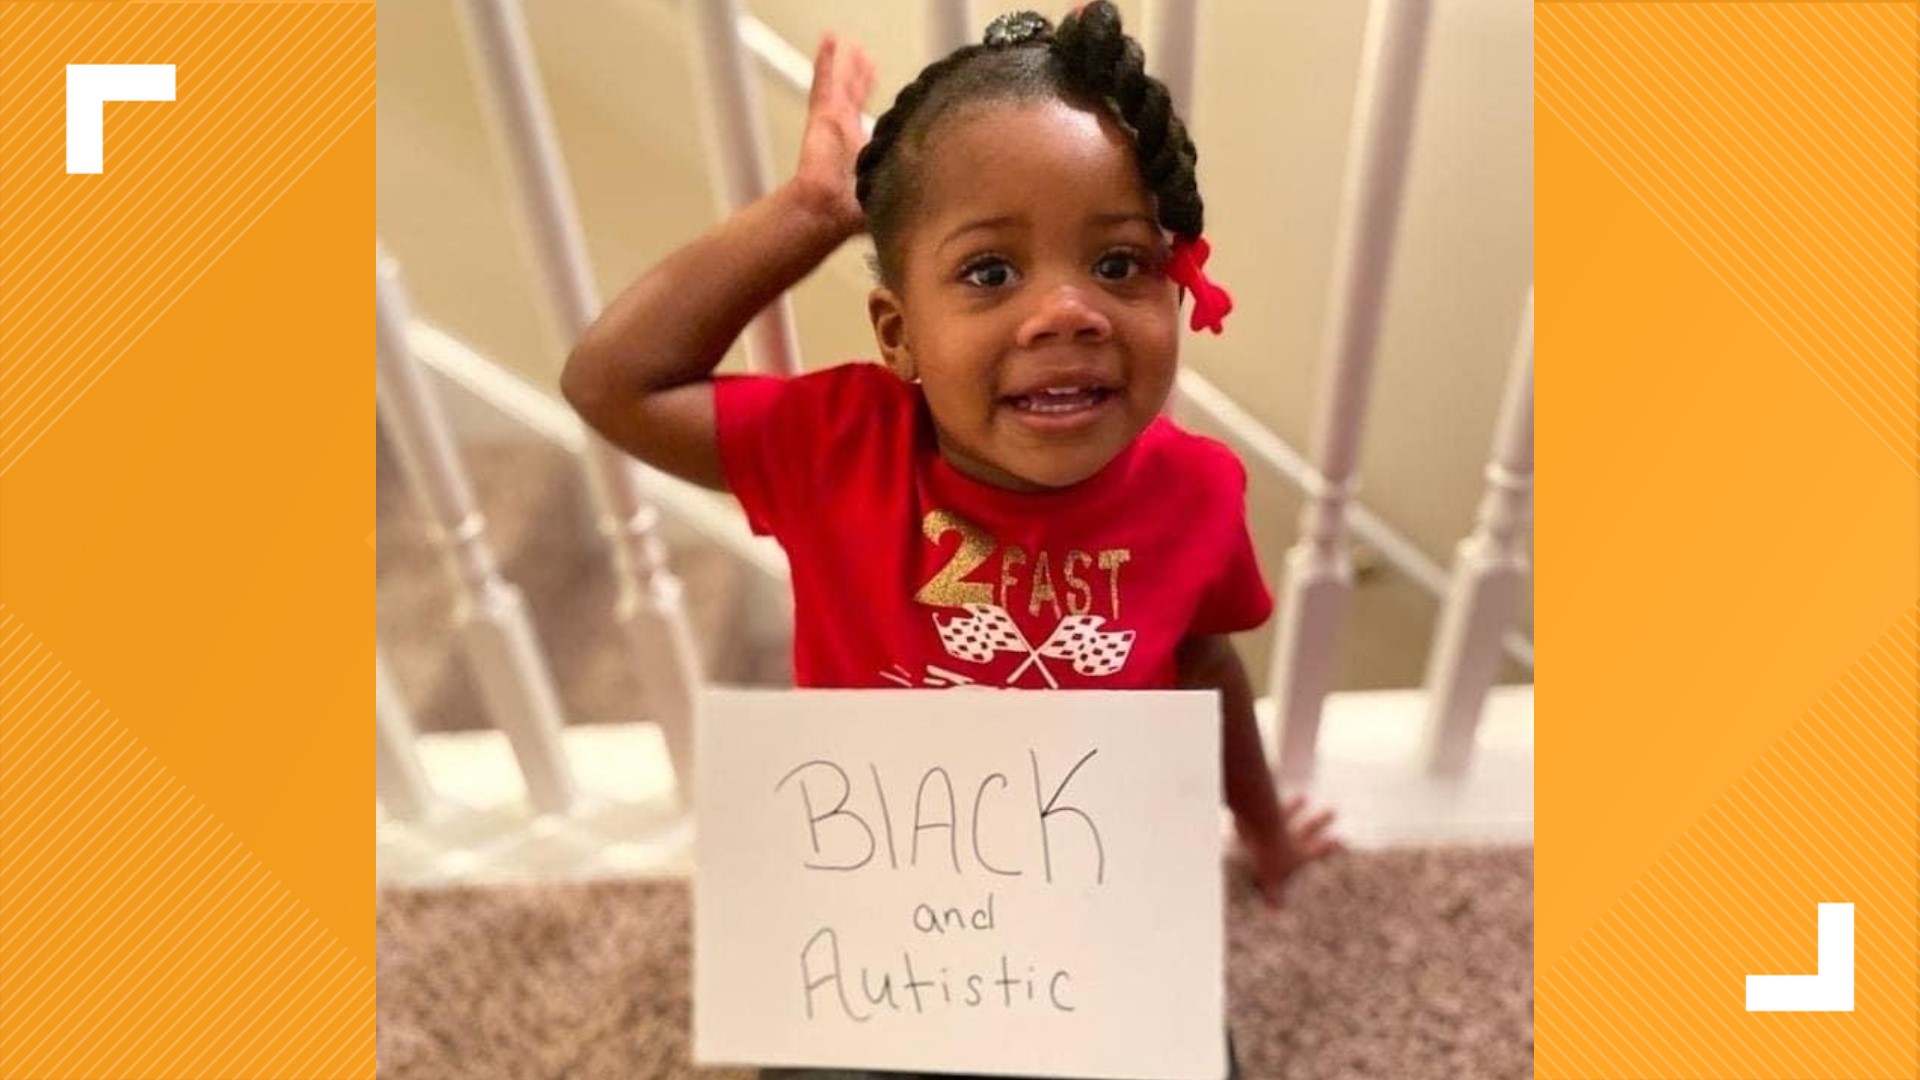 The Black Autism Support Society helps connect families with similar experiences.